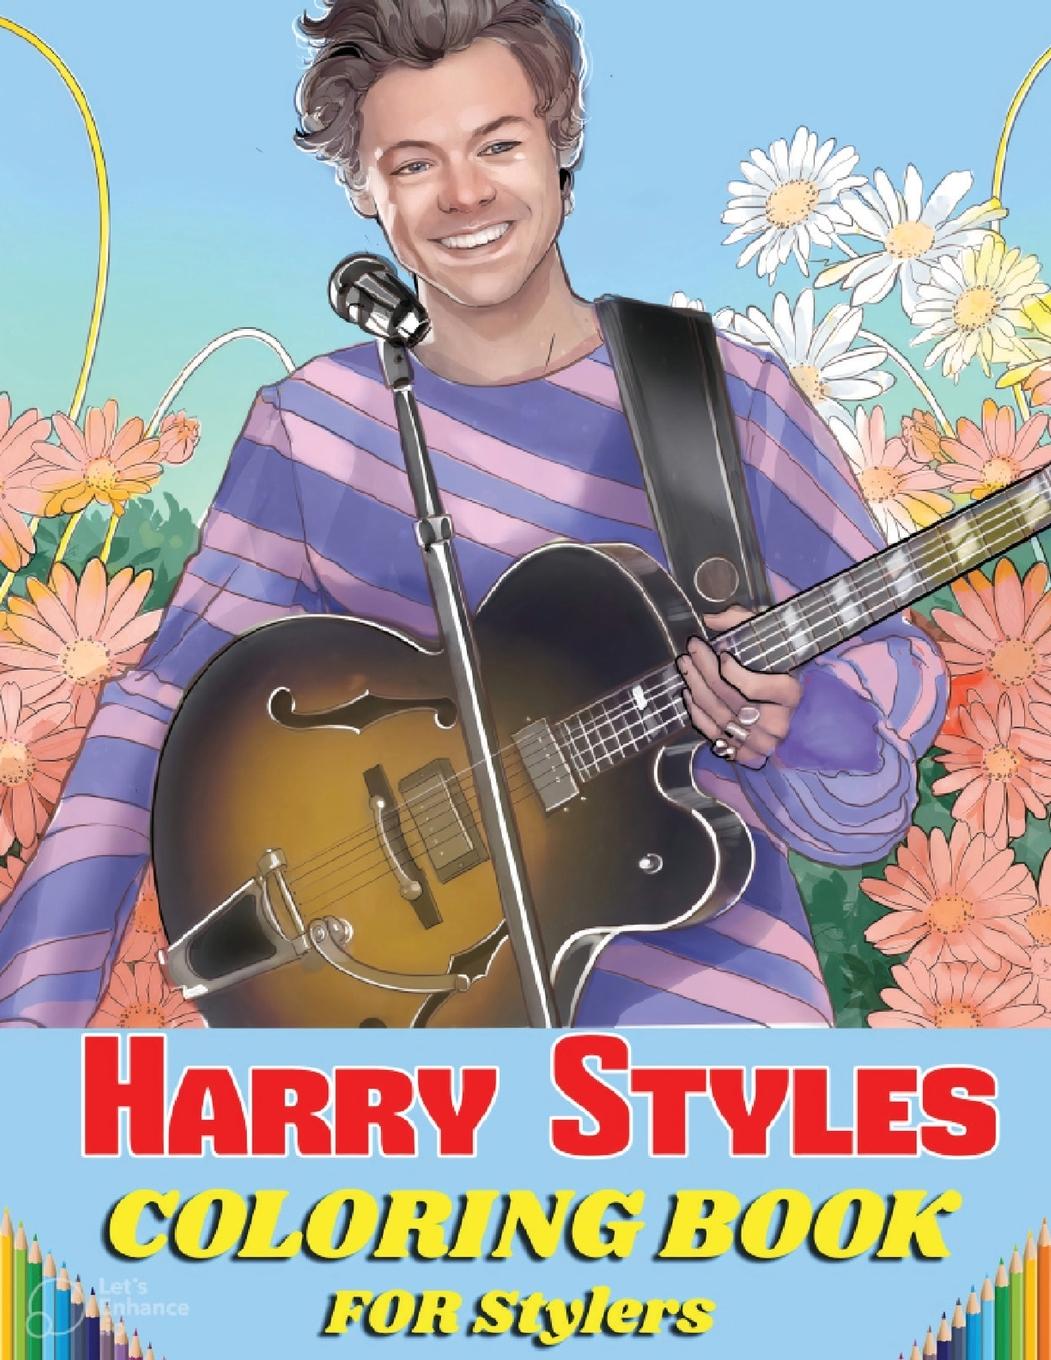 Book Harry Styles Coloring Book For Stylers 